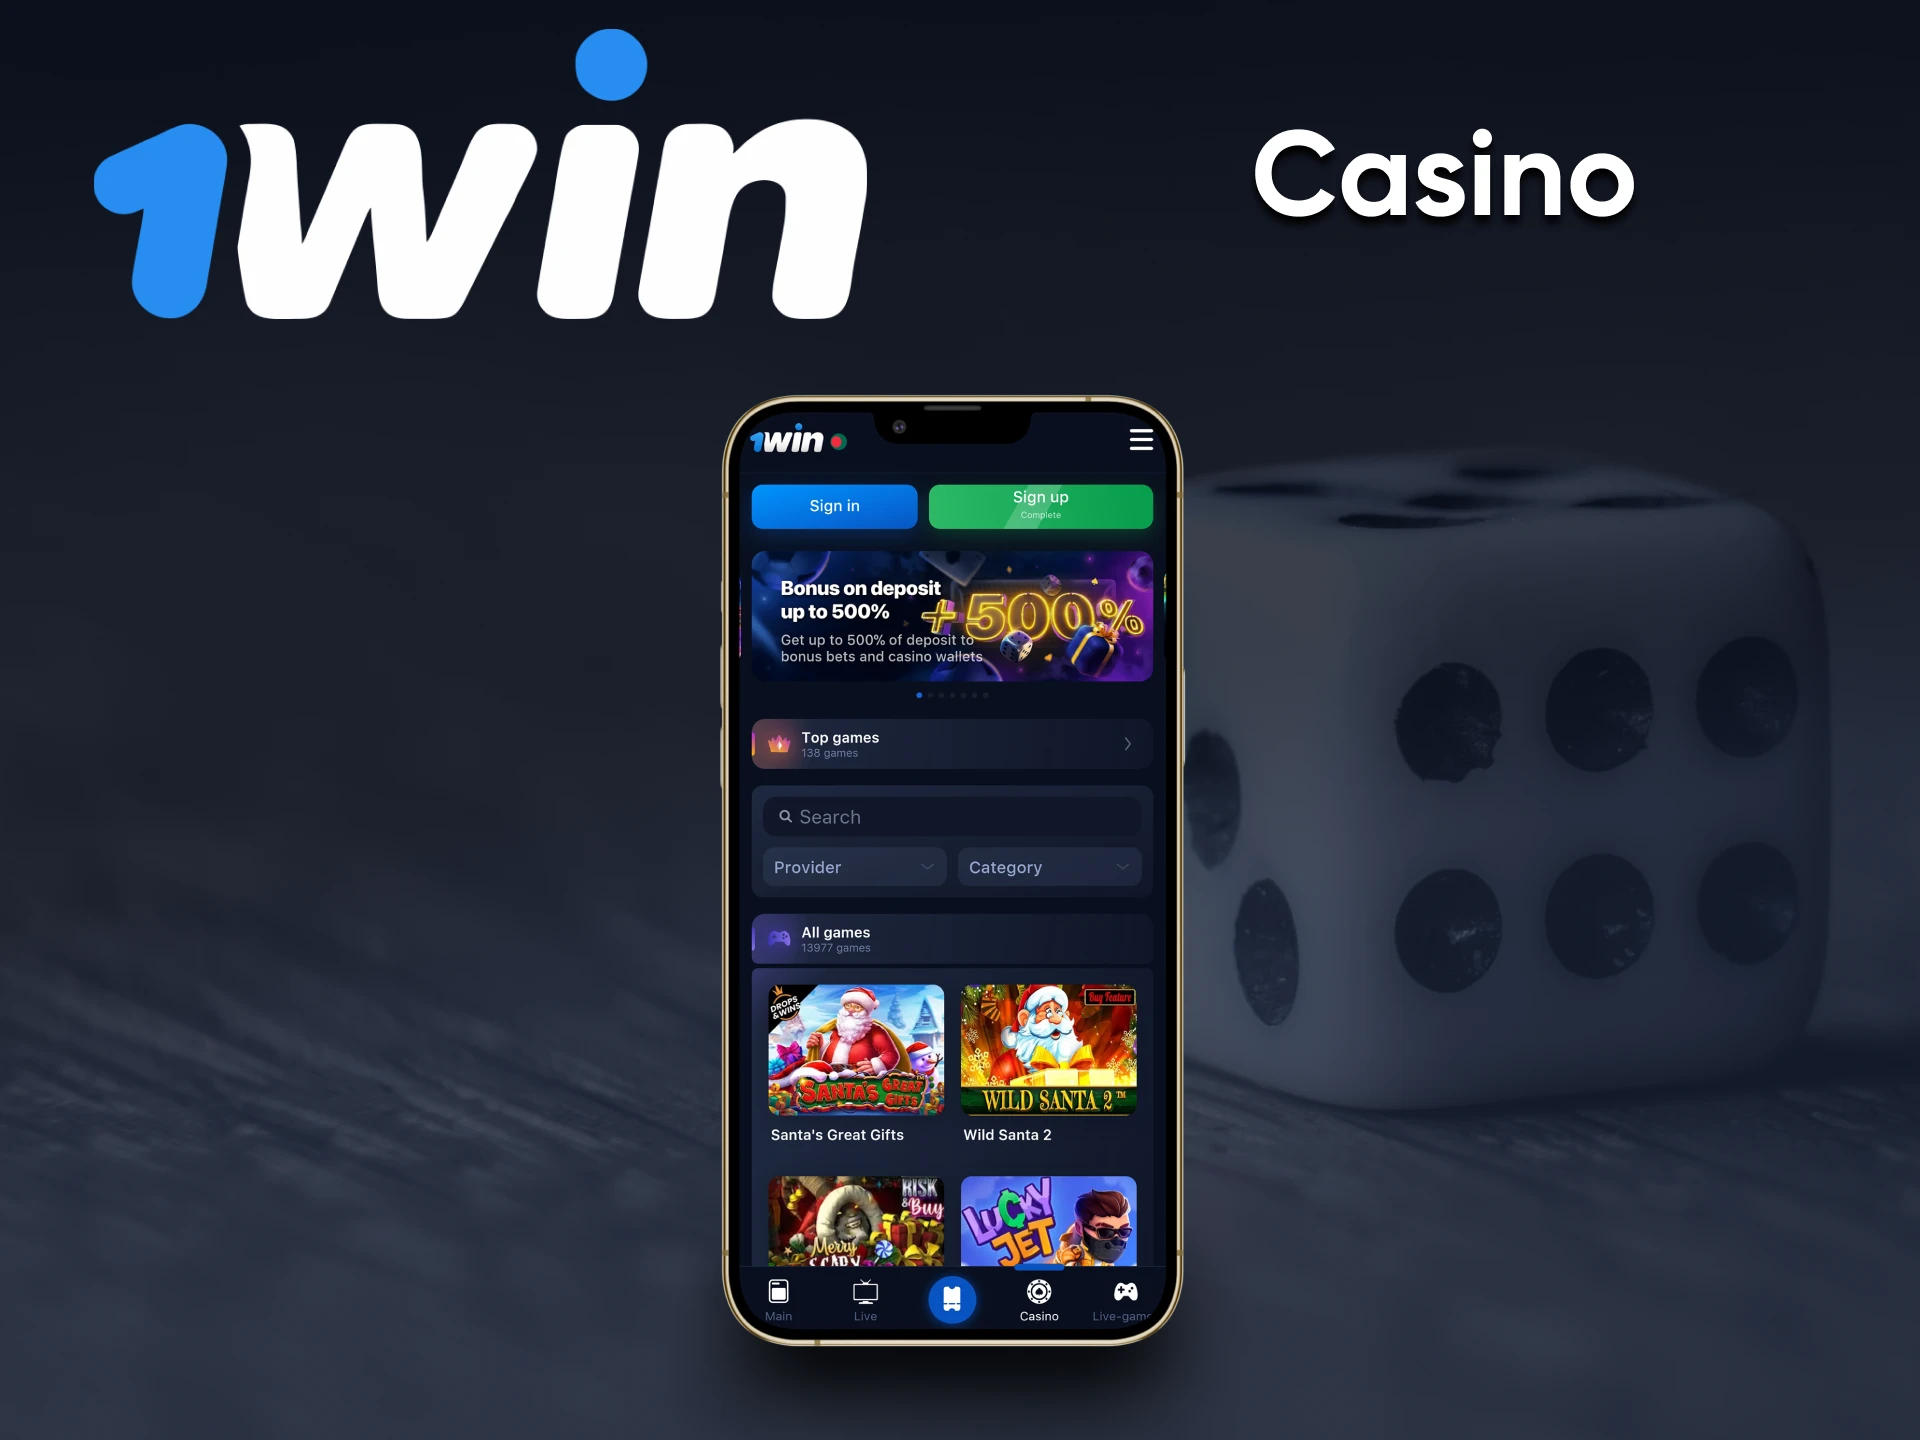 On the 1win service you can play in the casino.